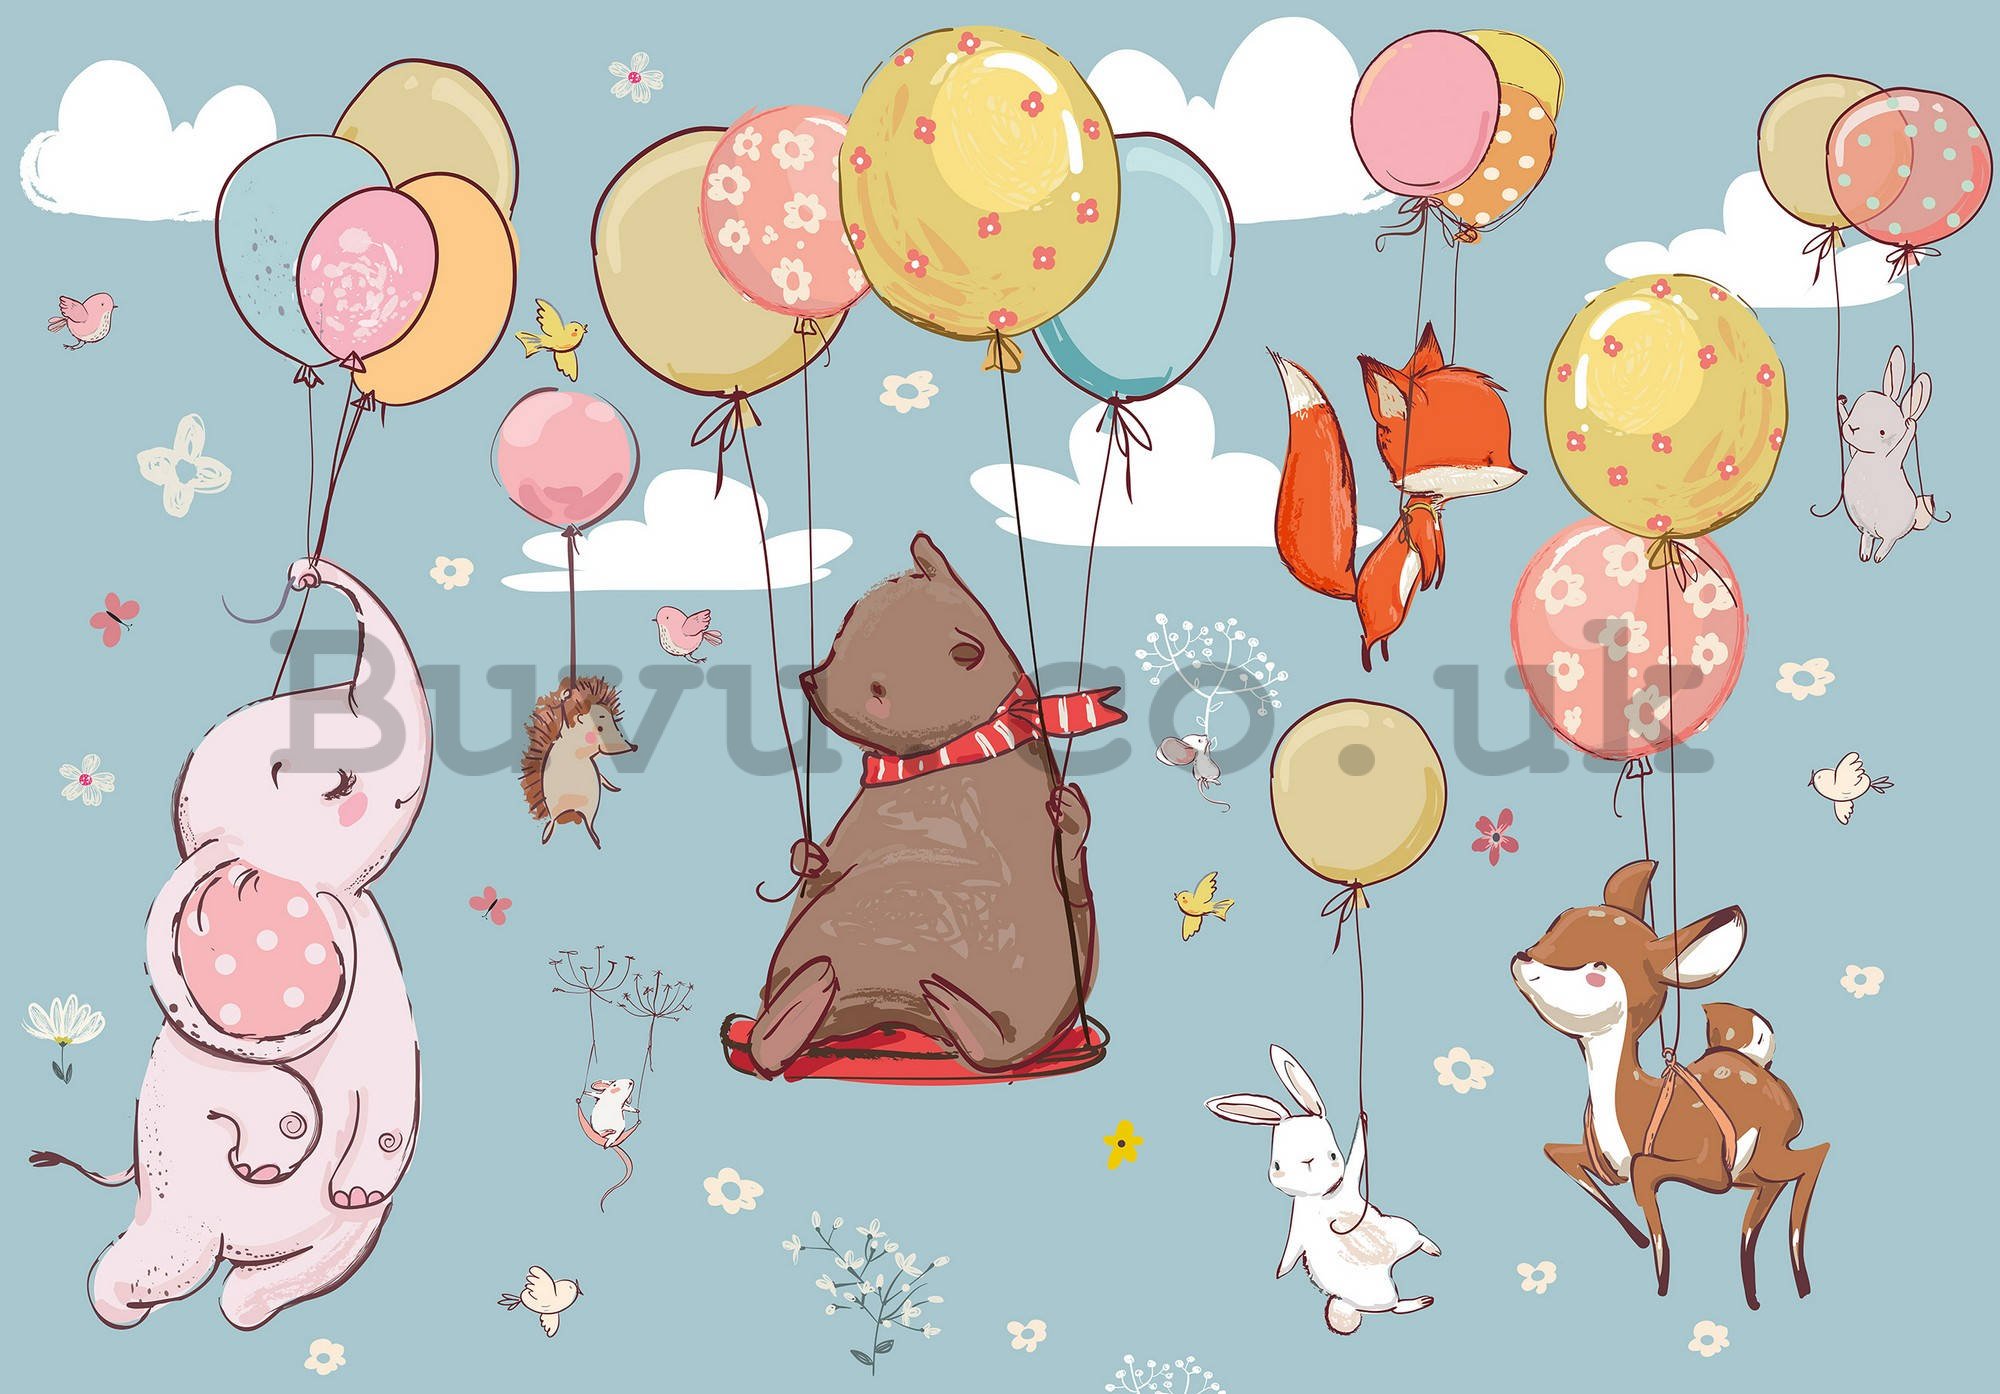 Wall mural vlies: Animals in the clouds - 104x70,5 cm